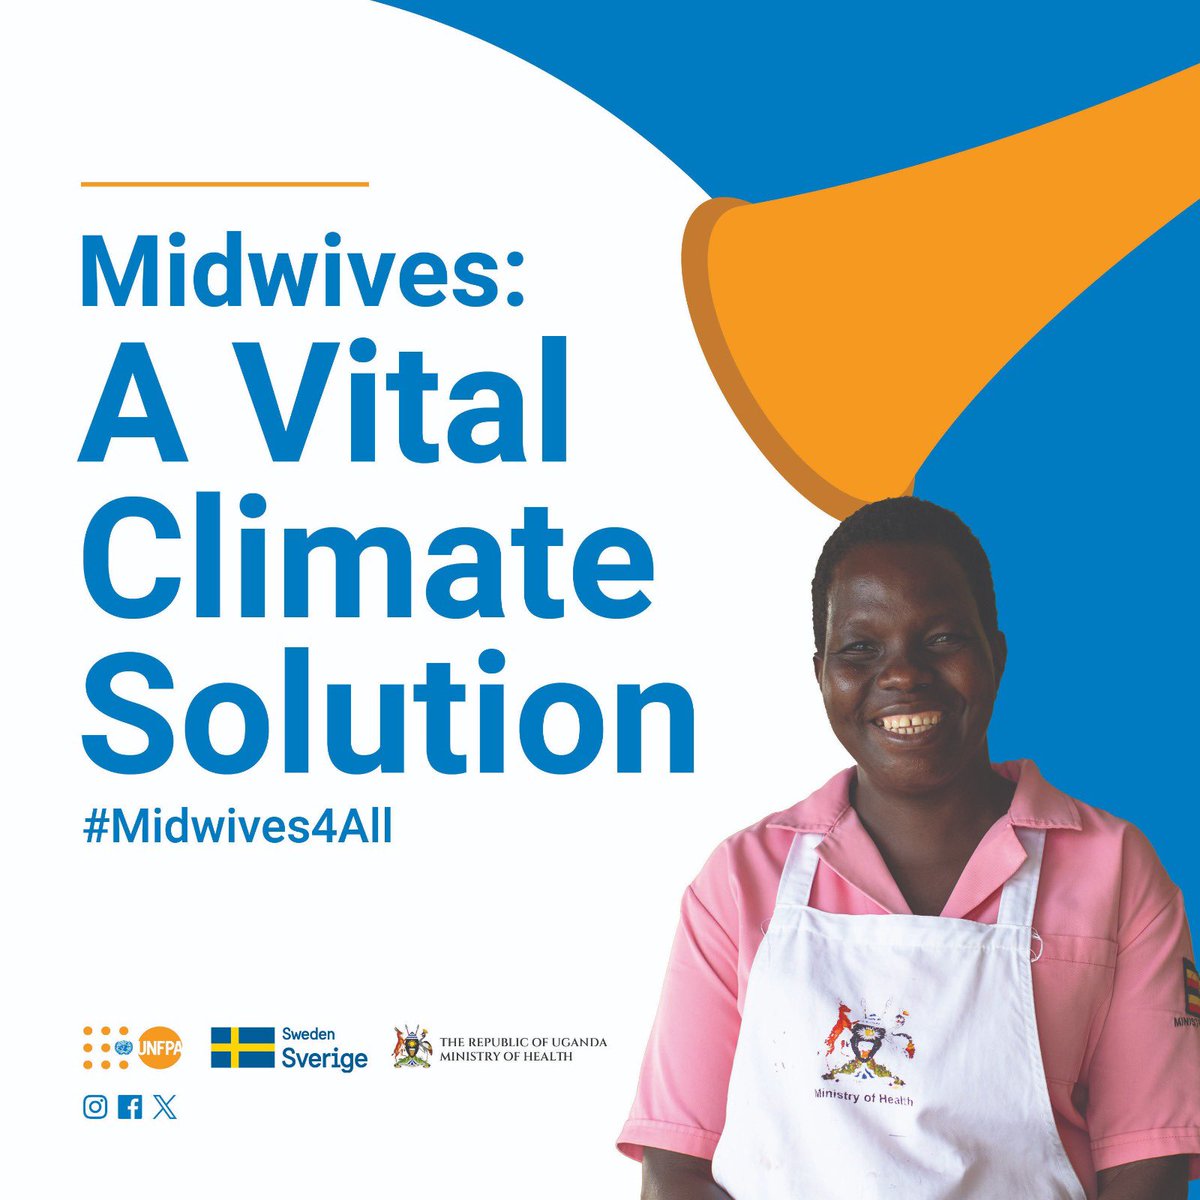 Celebrating International Midwives Day! With only 1.9 million midwives globally, @UNFPAUganda and partners are working towards bridging the gap to meet the growing need. Happy International Day of the Midwife! #Midwives4All #IDM2024